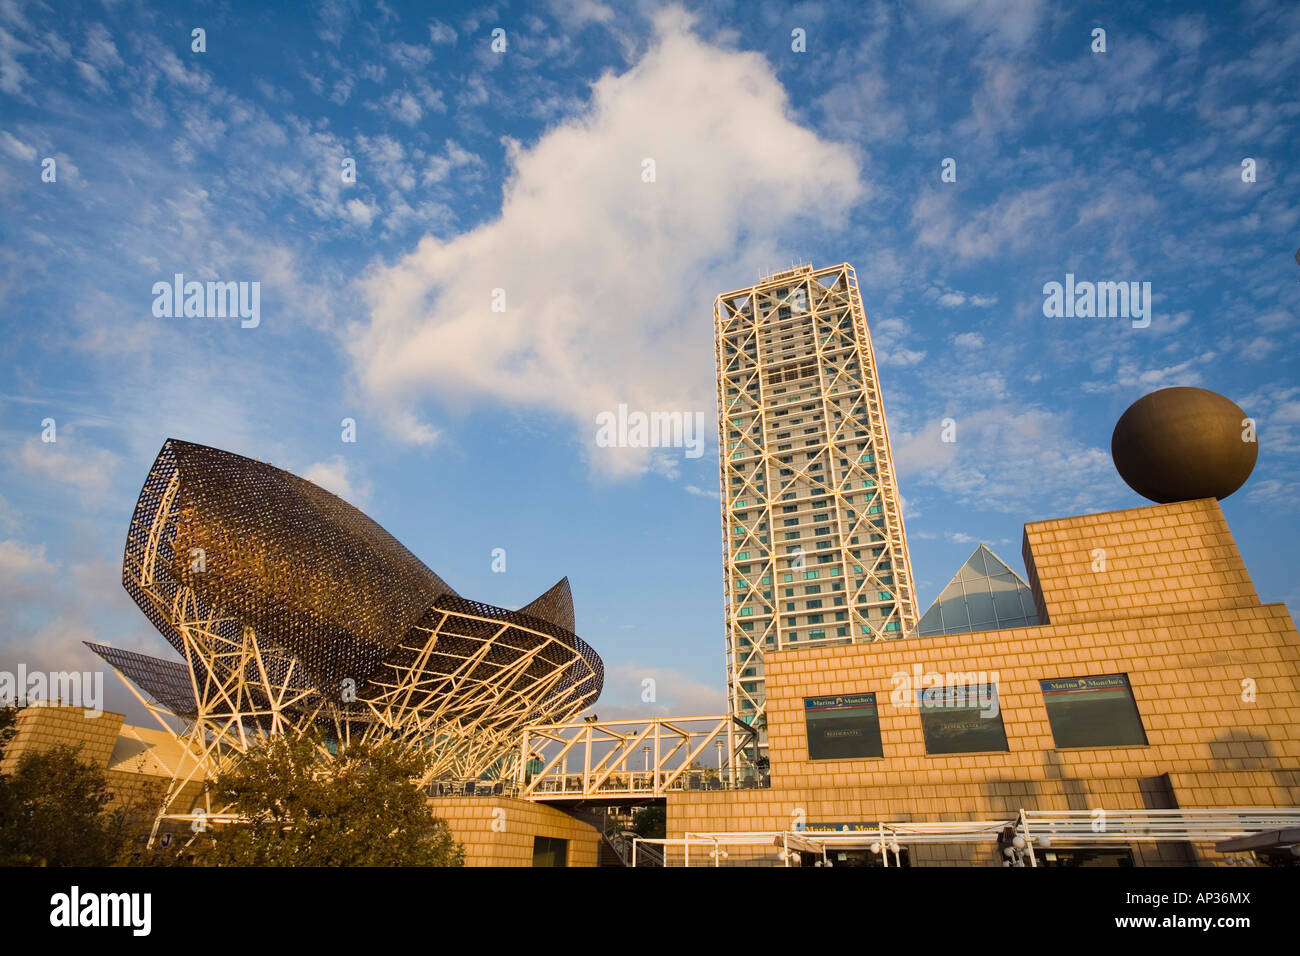 Fish, sculpture by Frank O. Gehry, Port Olimpic, Vila Olimpica, Barcelona, Spain Stock Photo